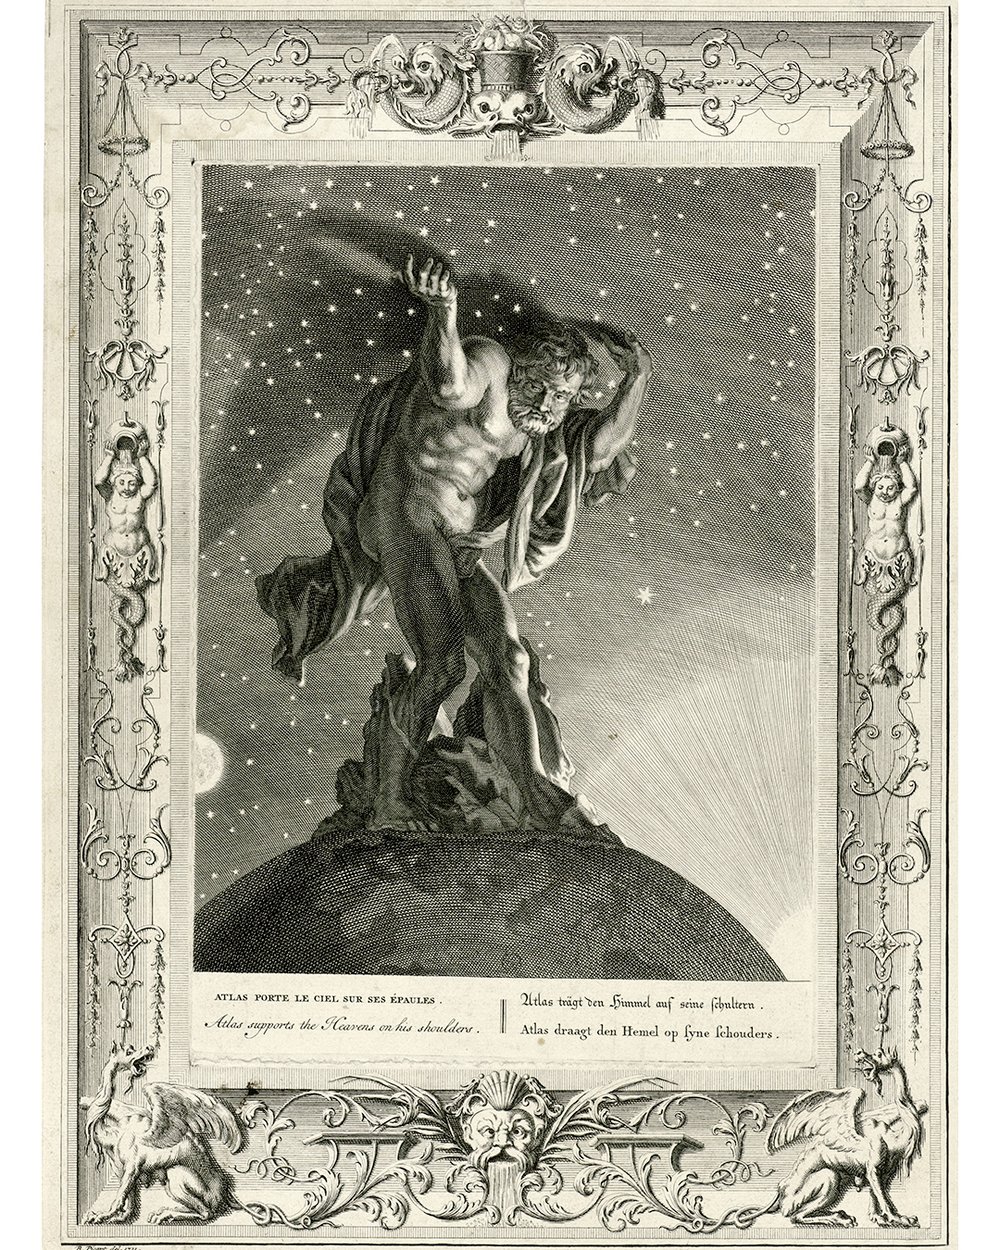 "Atlas turned into a mountain" (1731)